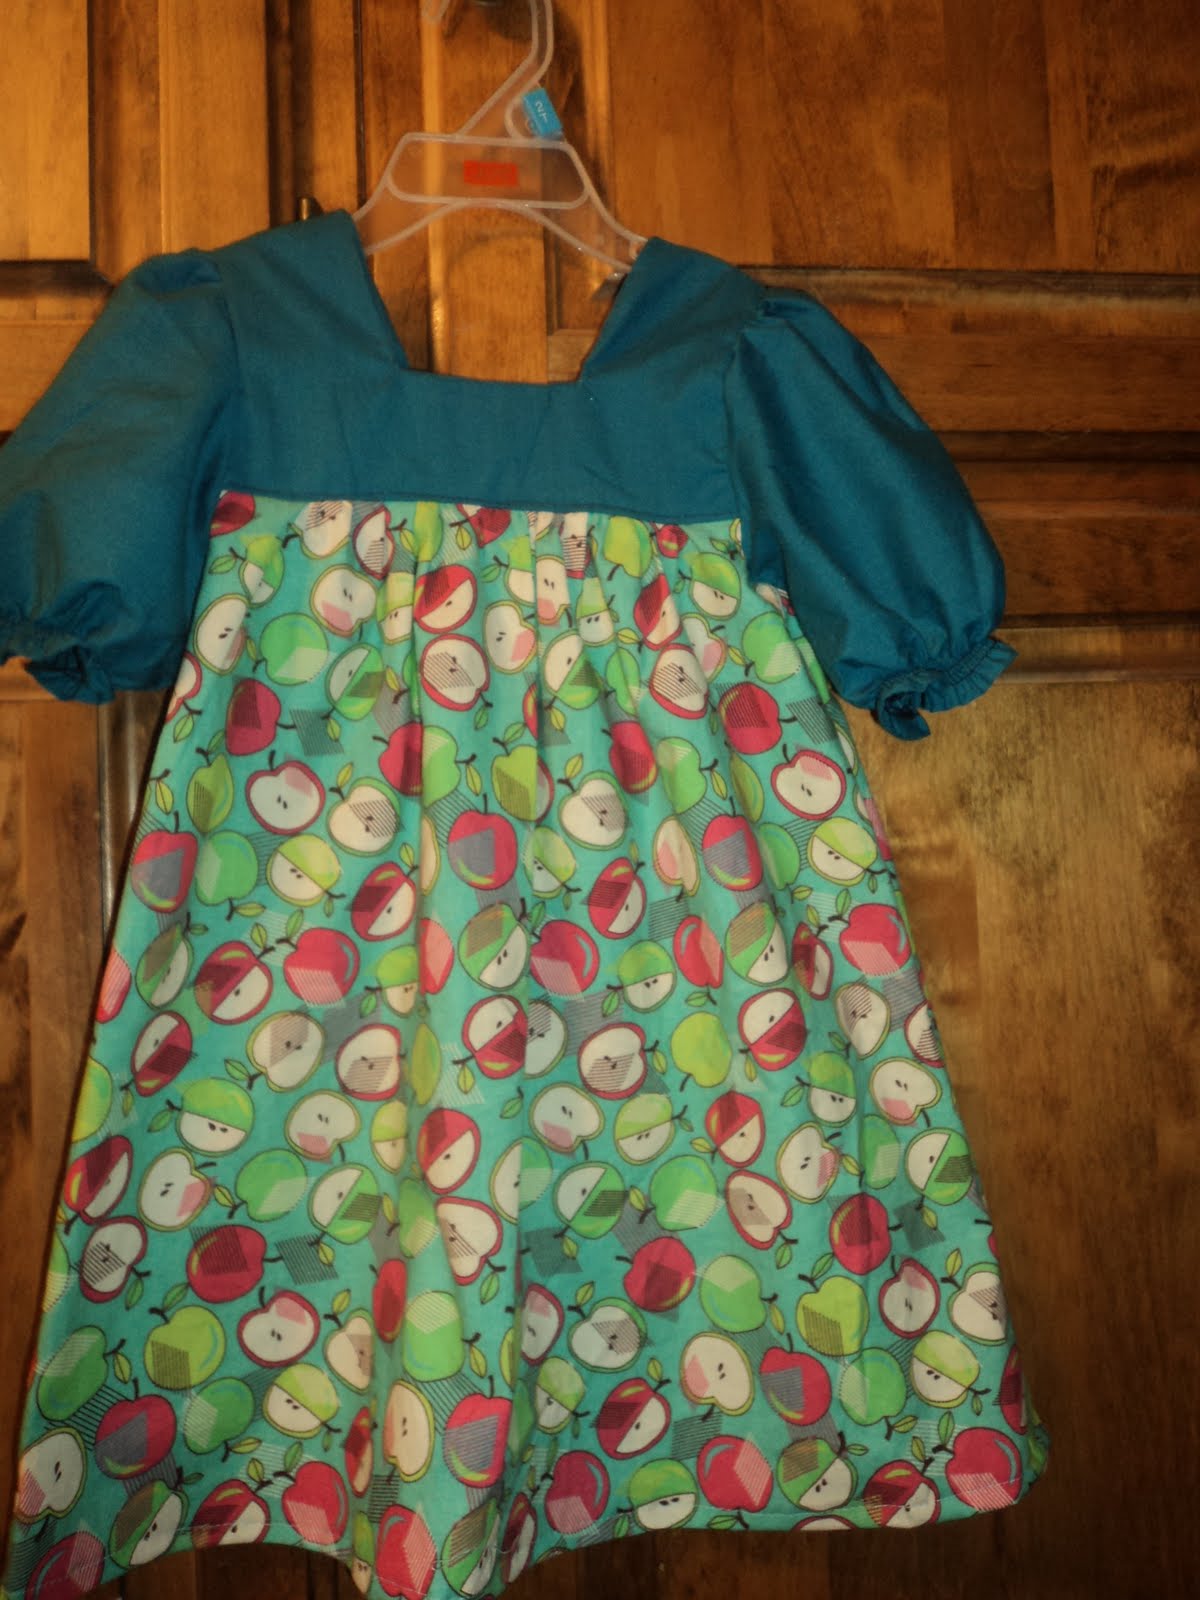 The apple picking dress - The Crafting Fiend